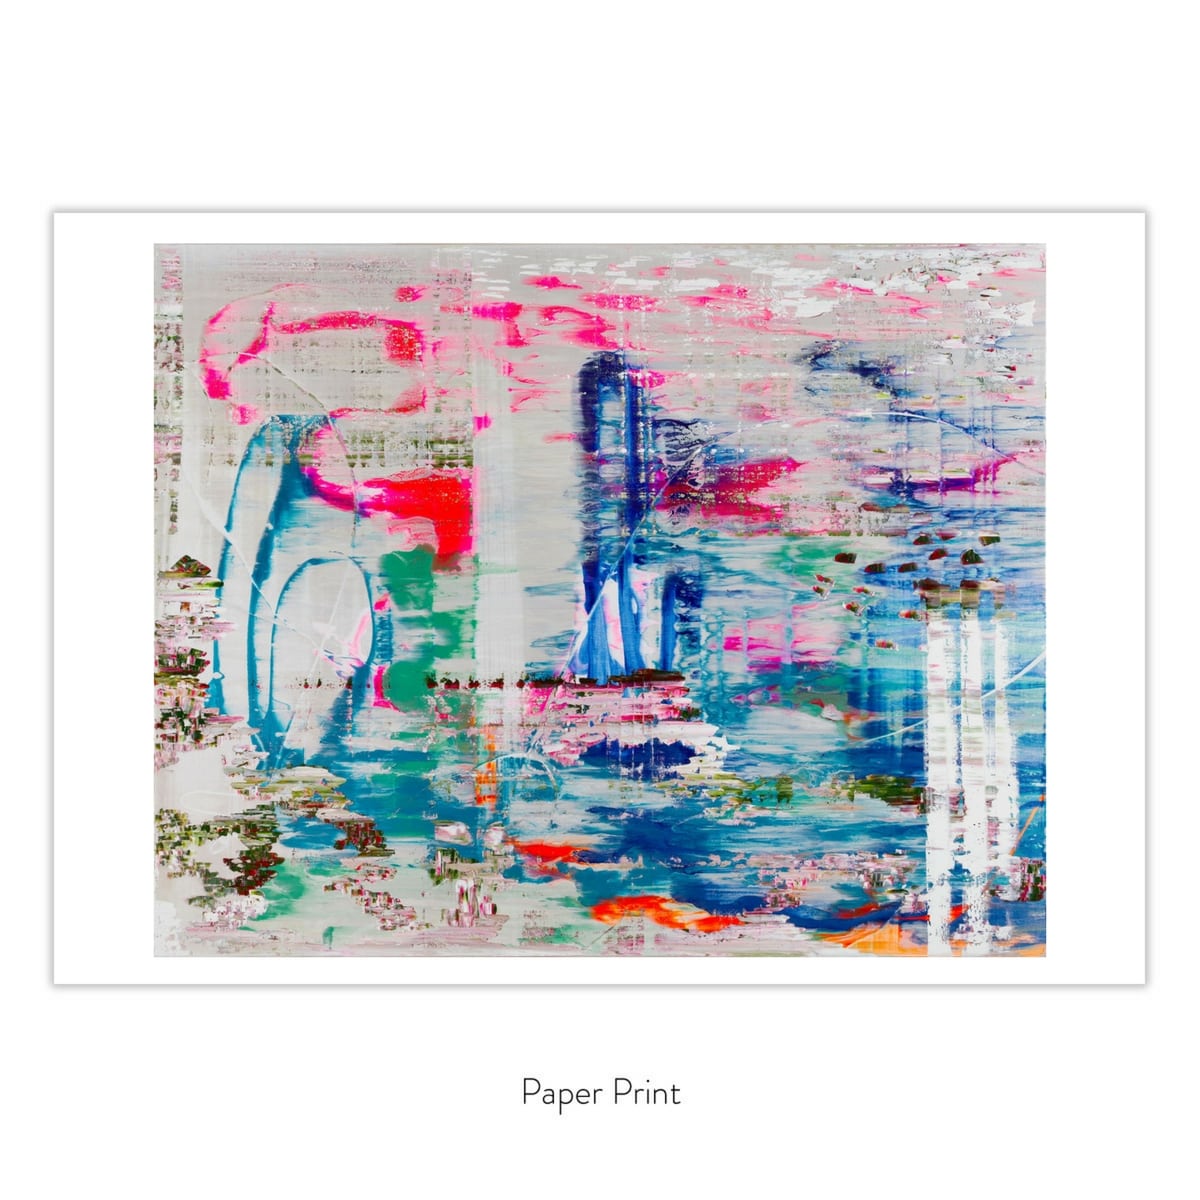 Jessica Zoob Contemporary fine art print - Playtime 1 in paper print format